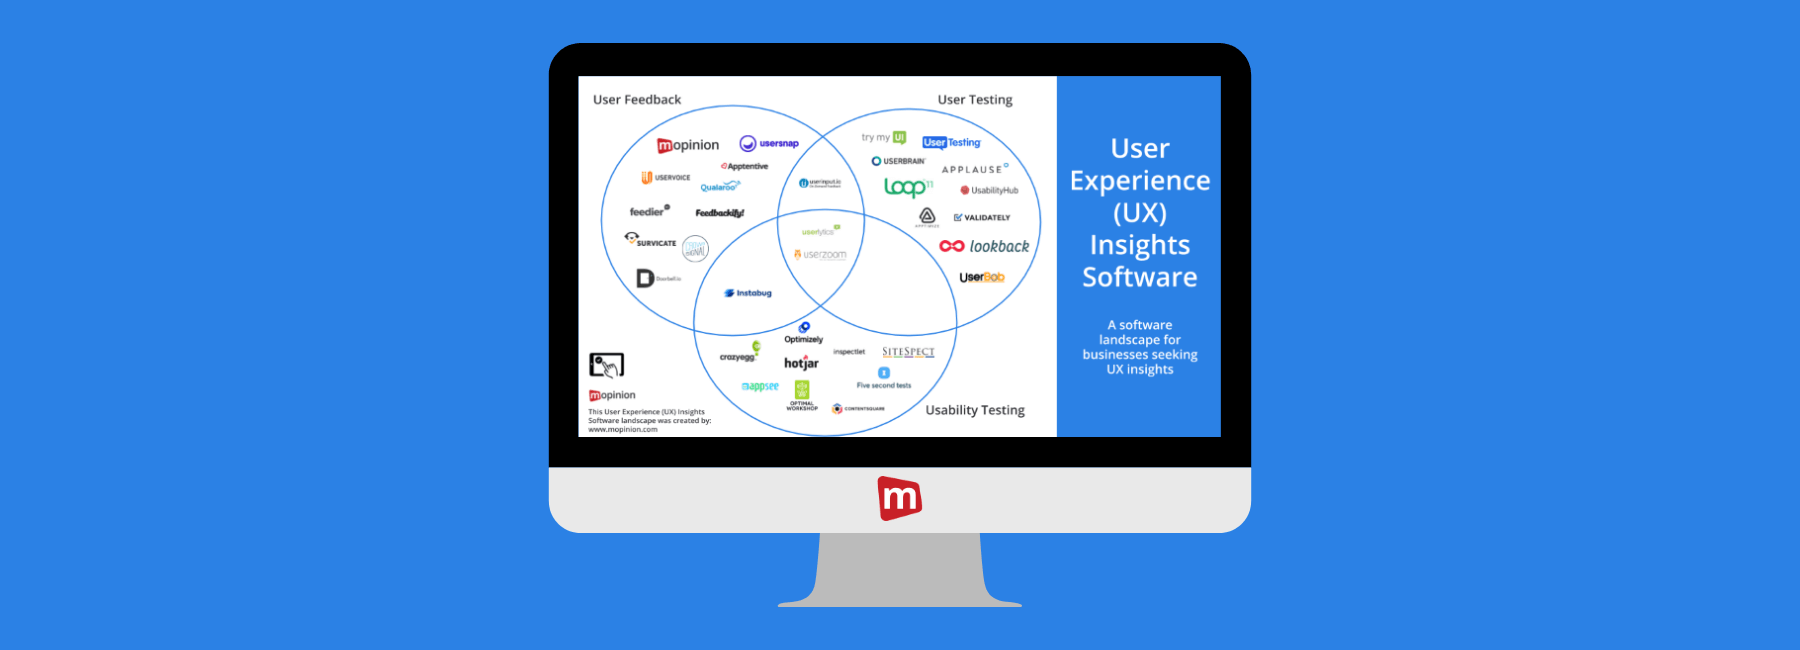 Mopinion’s 2020 User Experience (UX) Insights Software Landscape